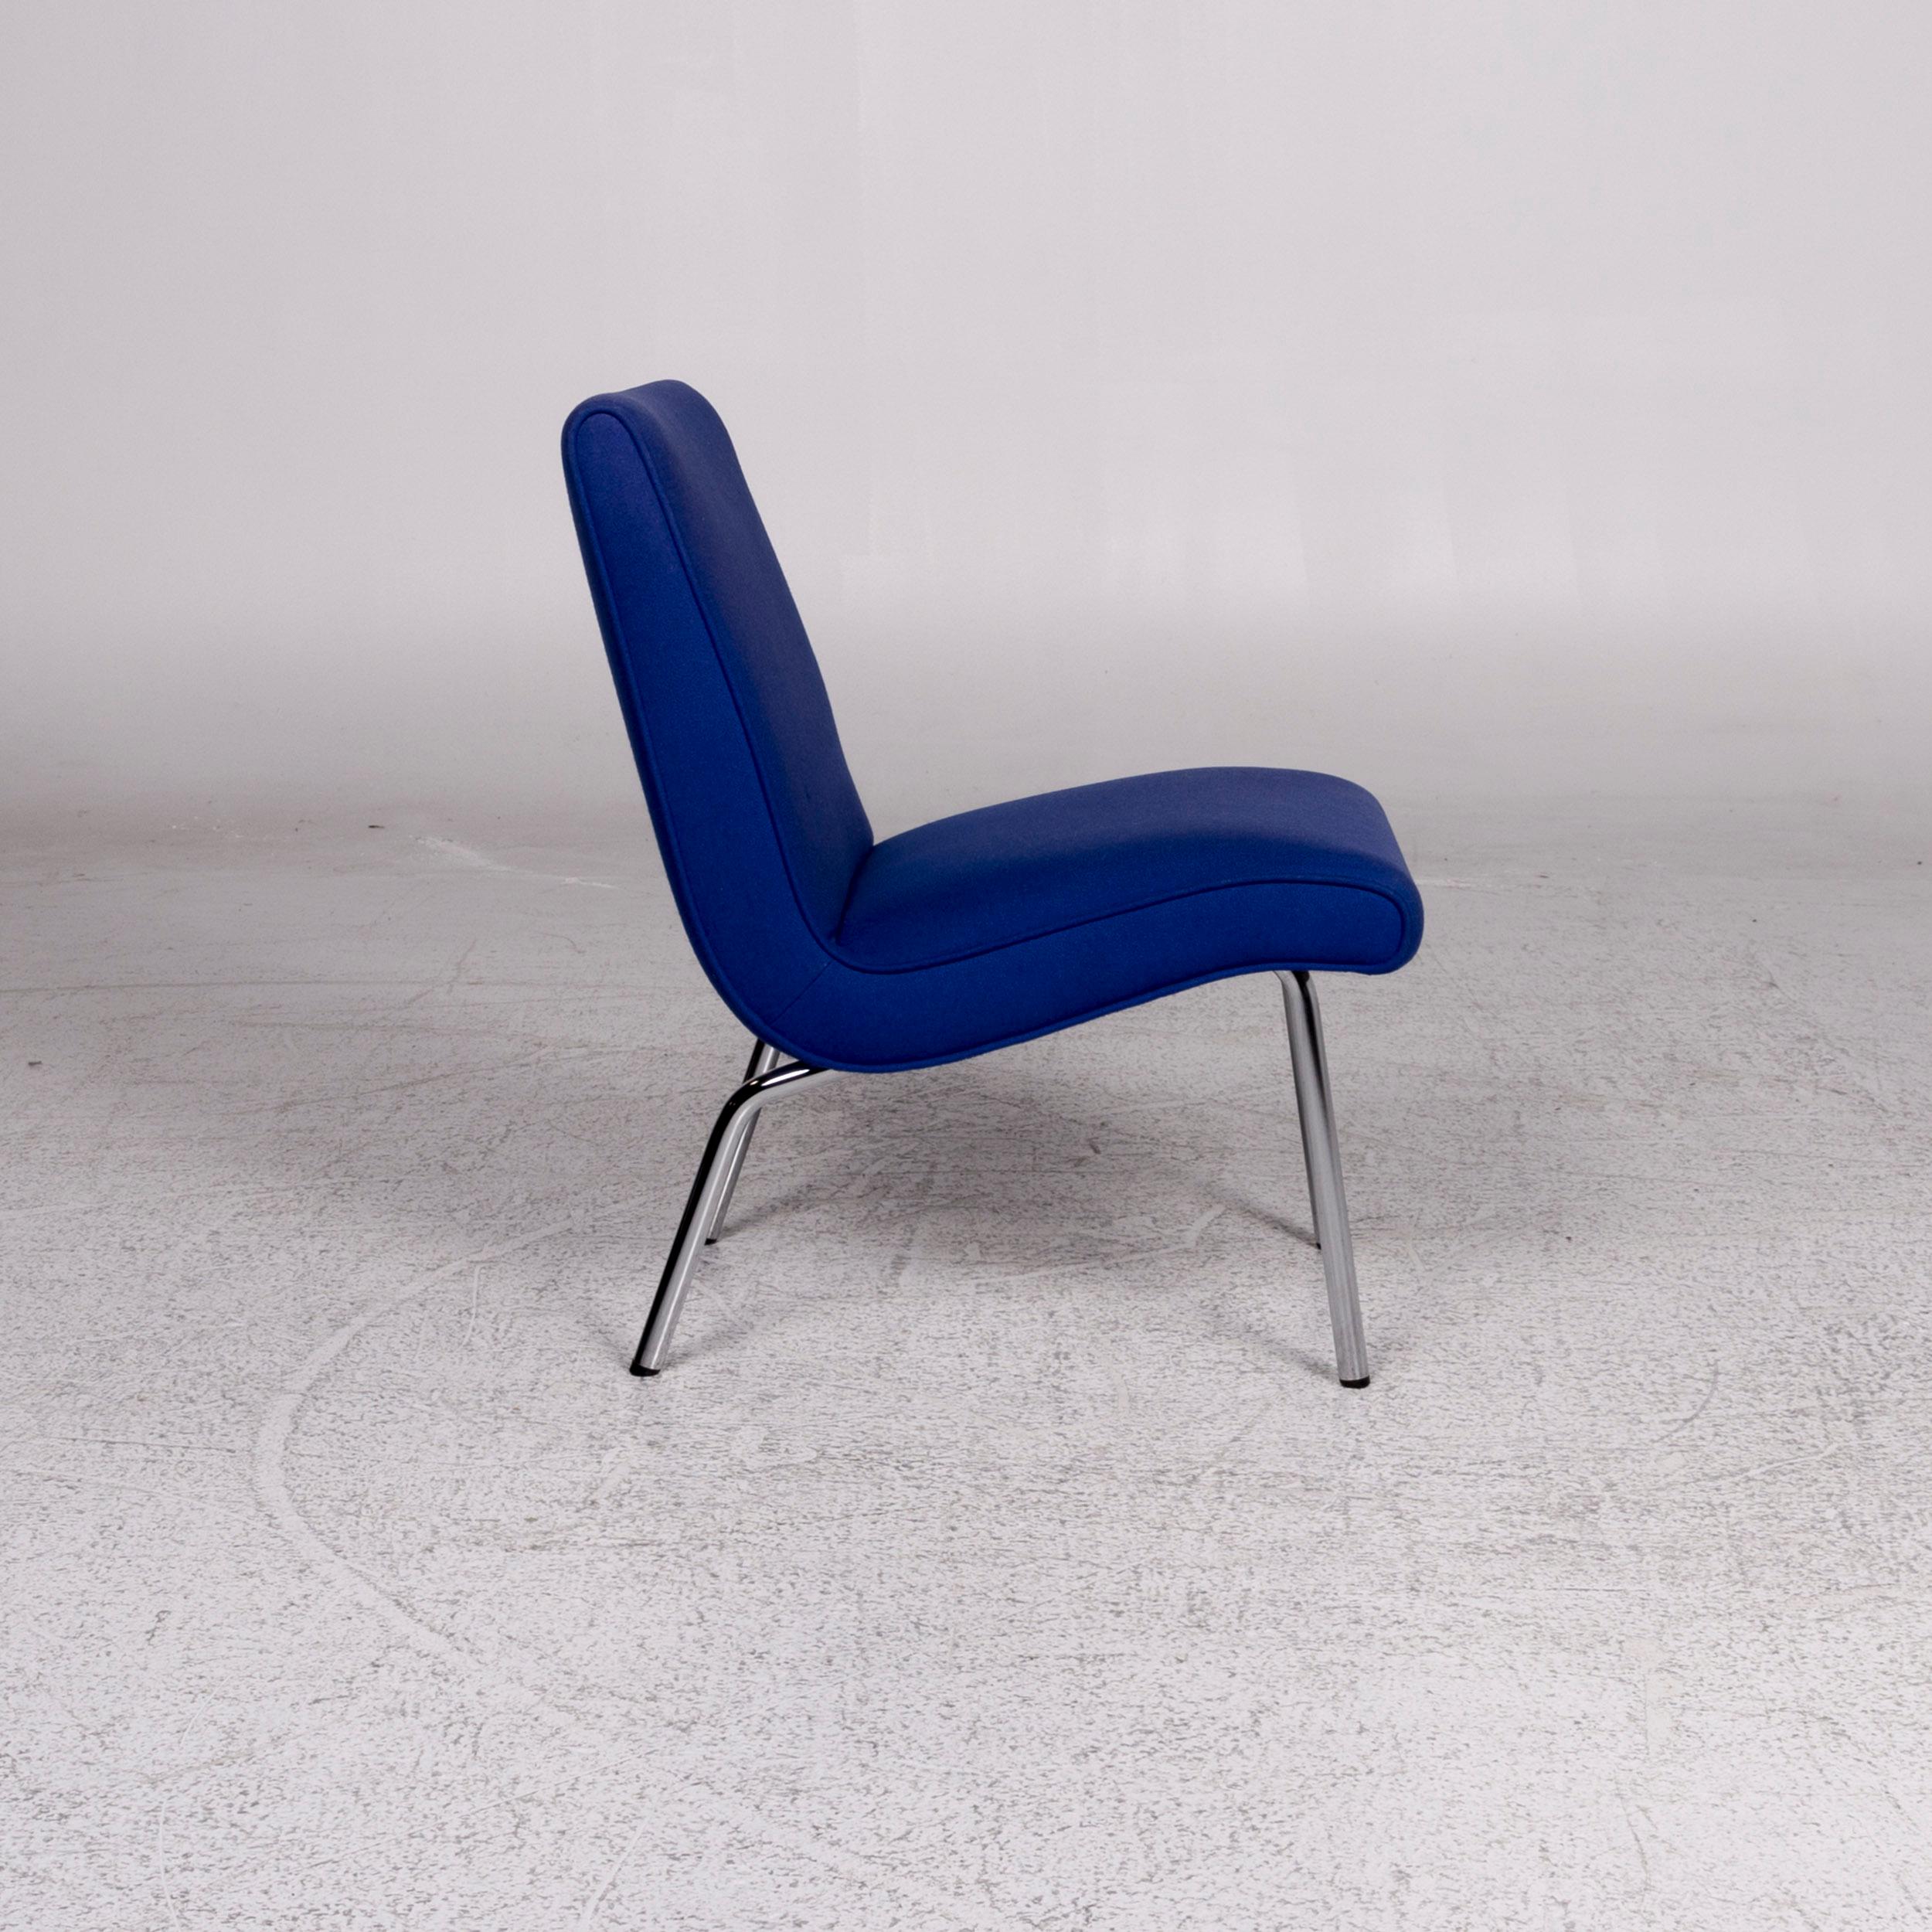 Walter Knoll Vostra Fabric Armchair Blue 4x Chair In Good Condition For Sale In Cologne, DE